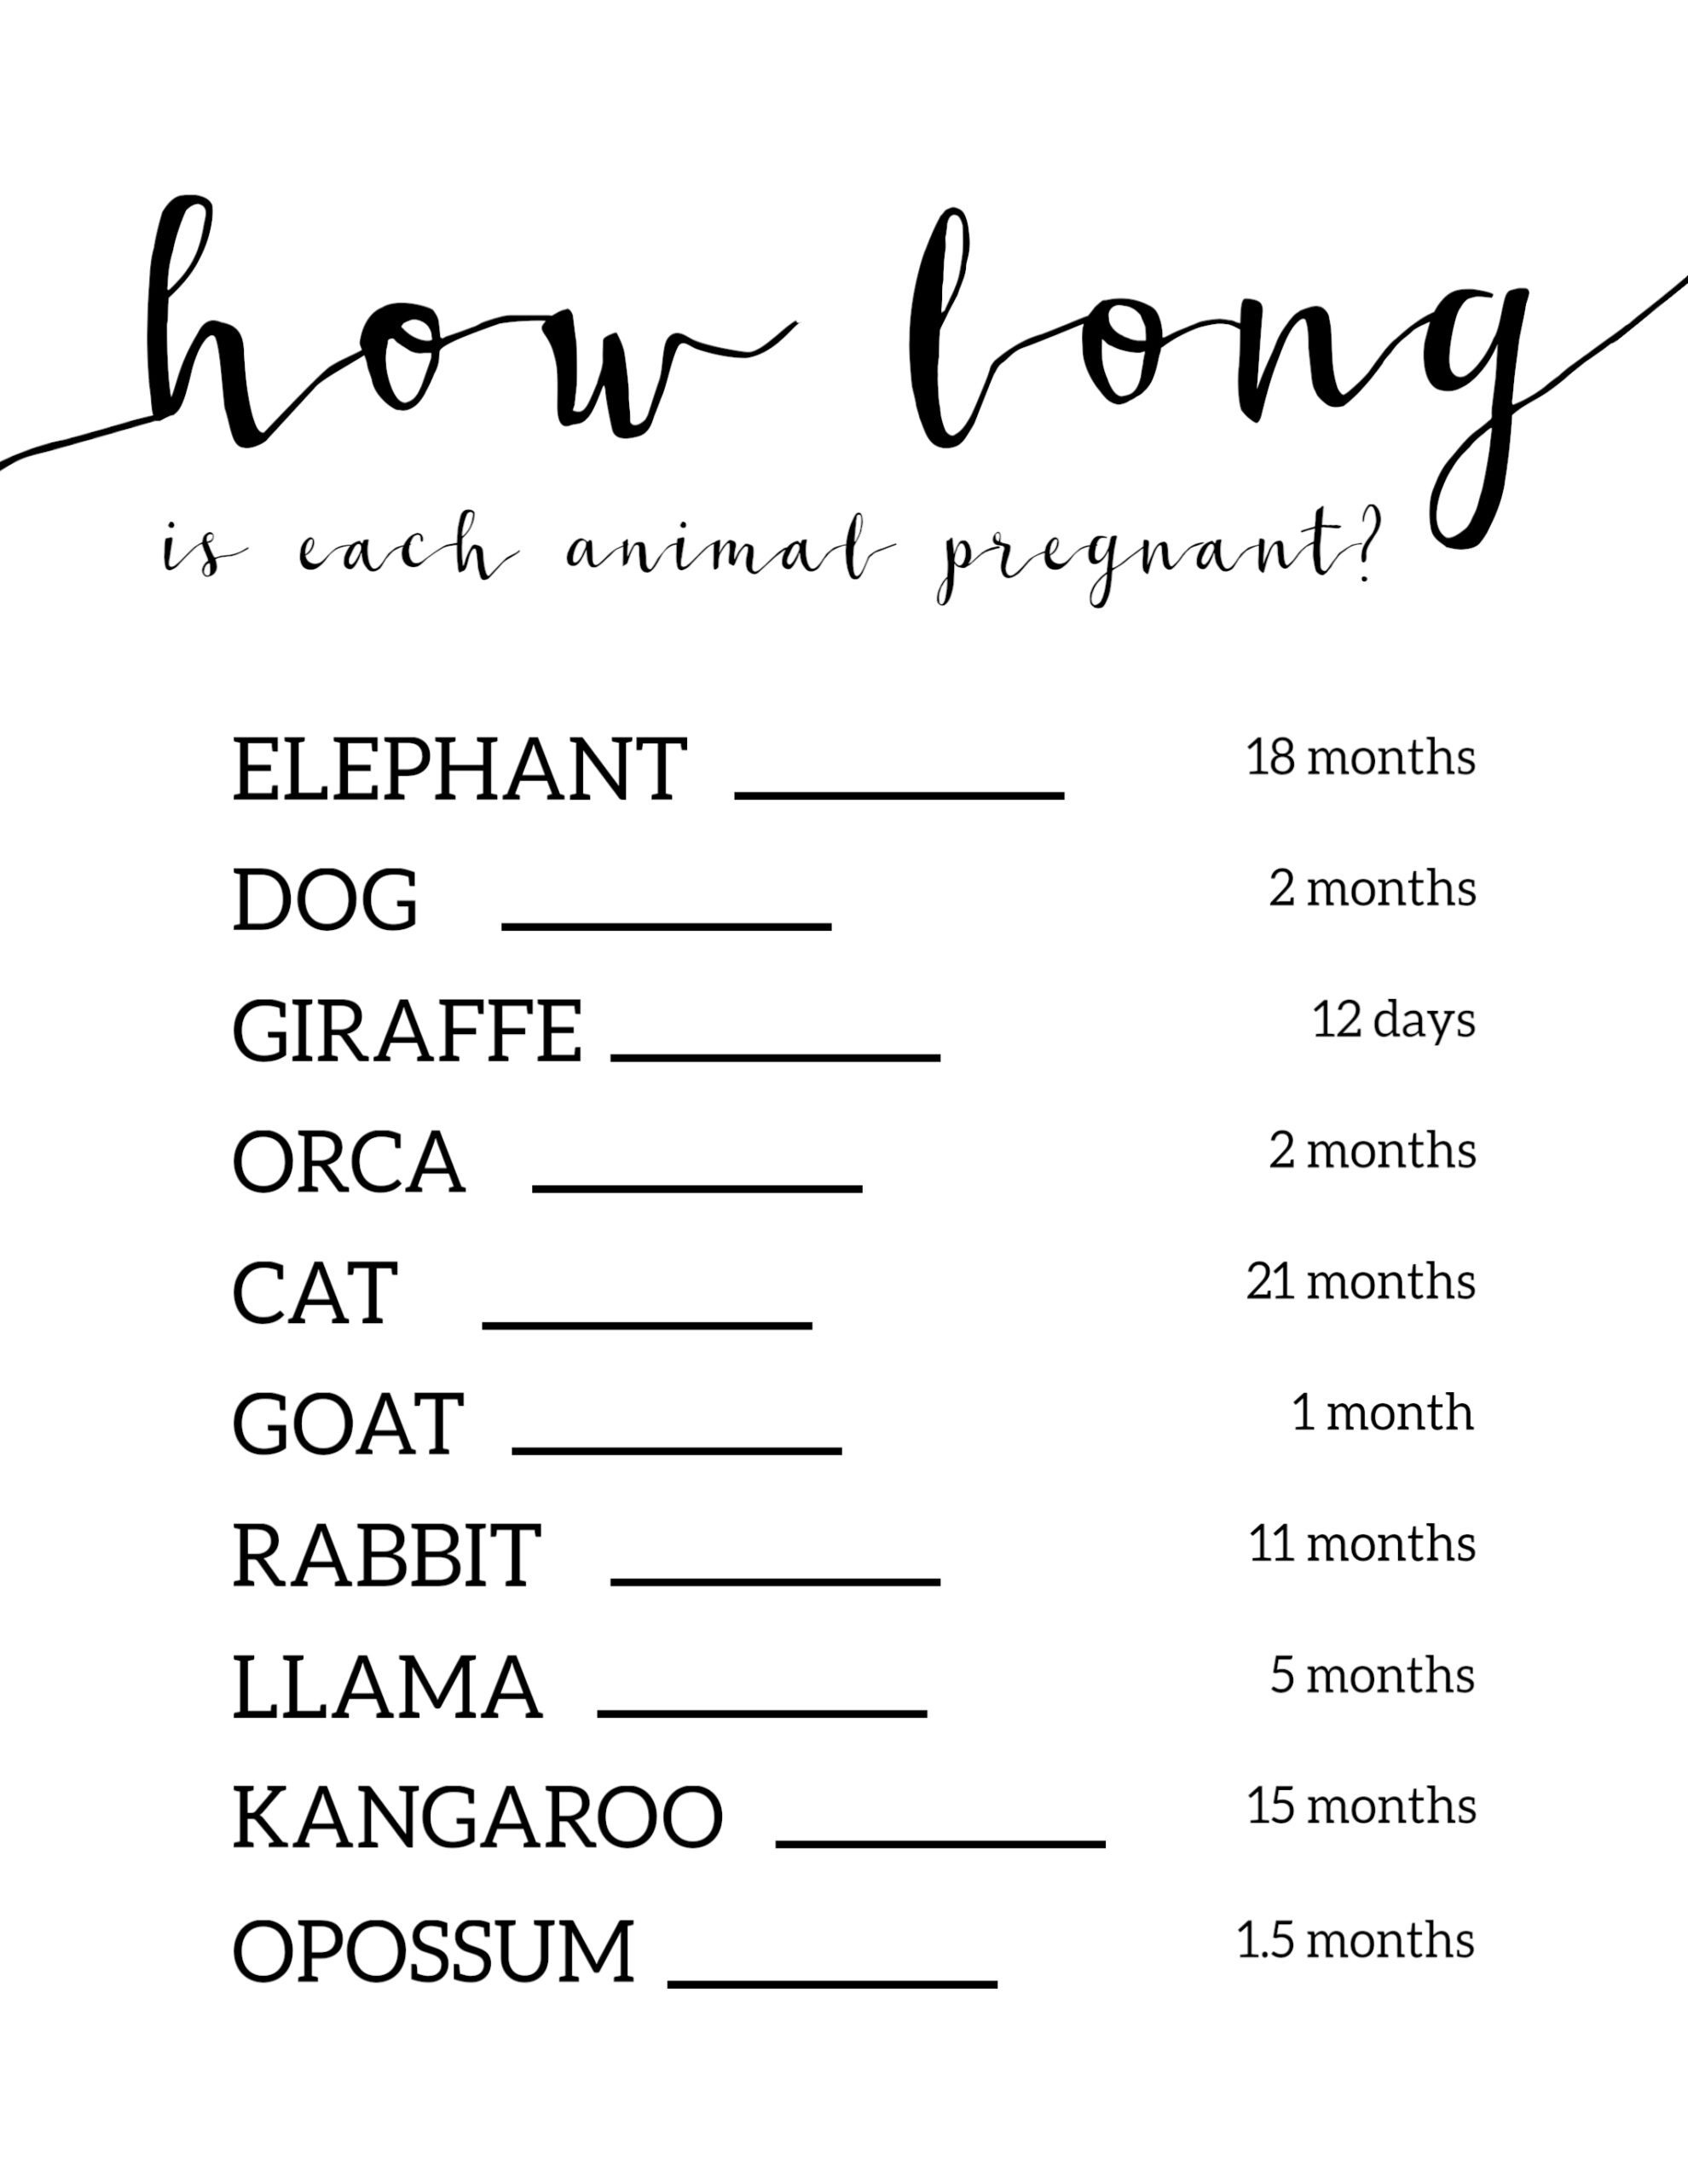 Free Baby Shower Games Printable {Animal Pregnancies} - Paper Trail - Free Printable Baby Shower Games For Large Groups